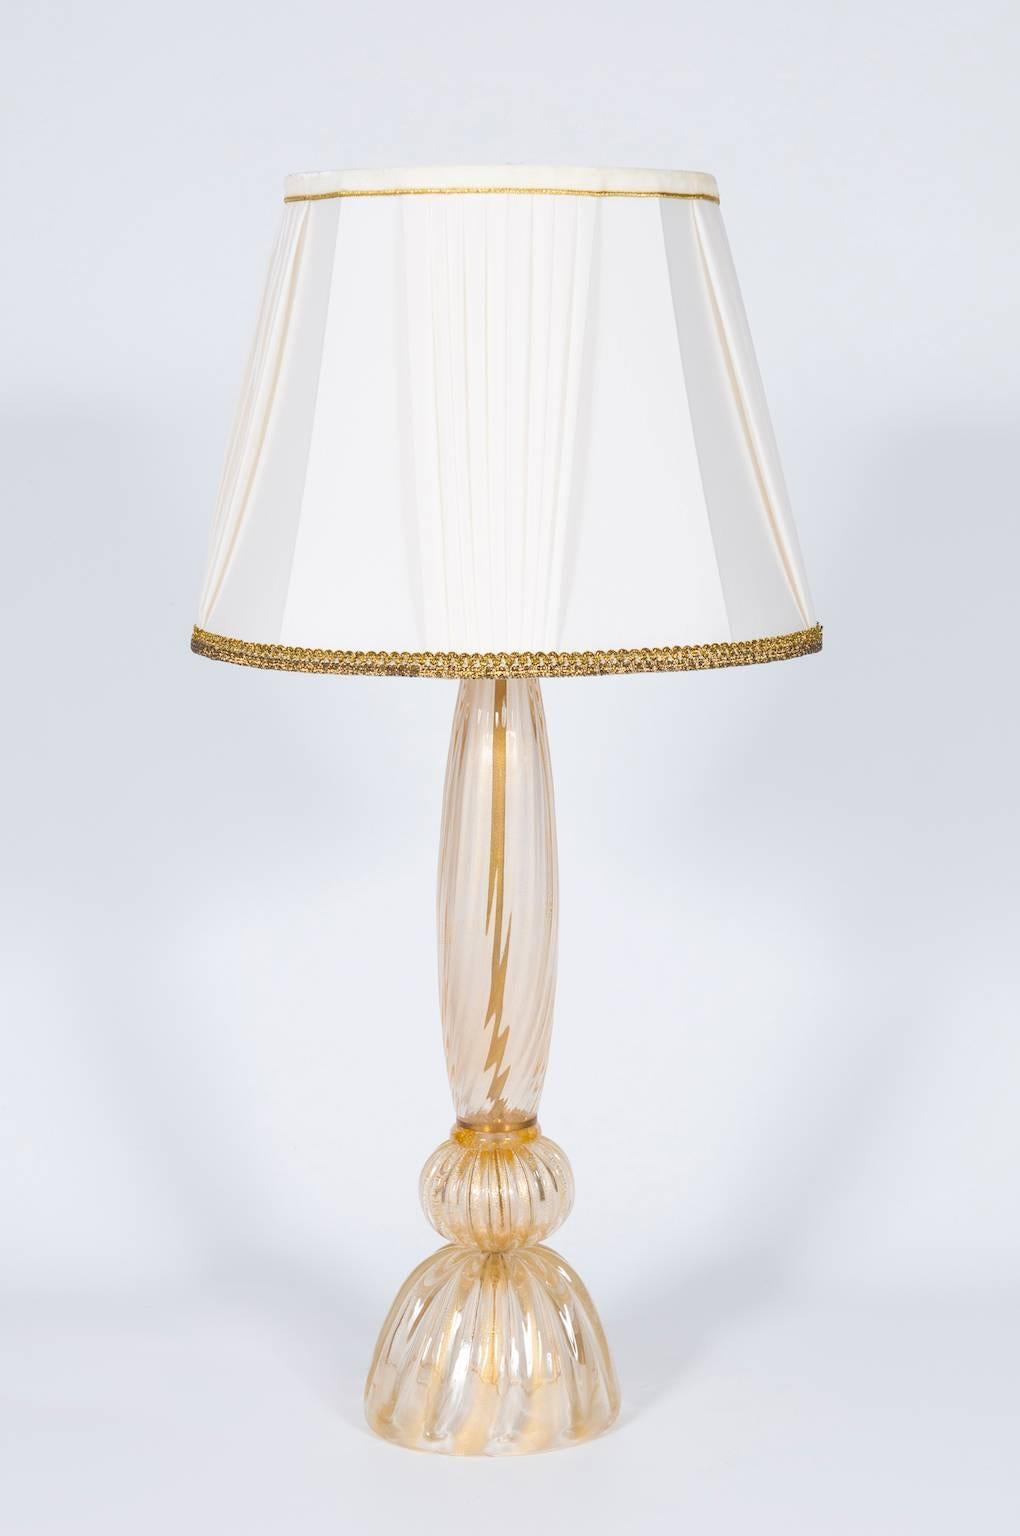 Handcrafted Gold Italian table lamp in Murano glass, composed from a gold striped base with above a sphere and from a gold striped stem, with one light over. The Table lamp is in very excellent original condition, made circa 1980s.
We can